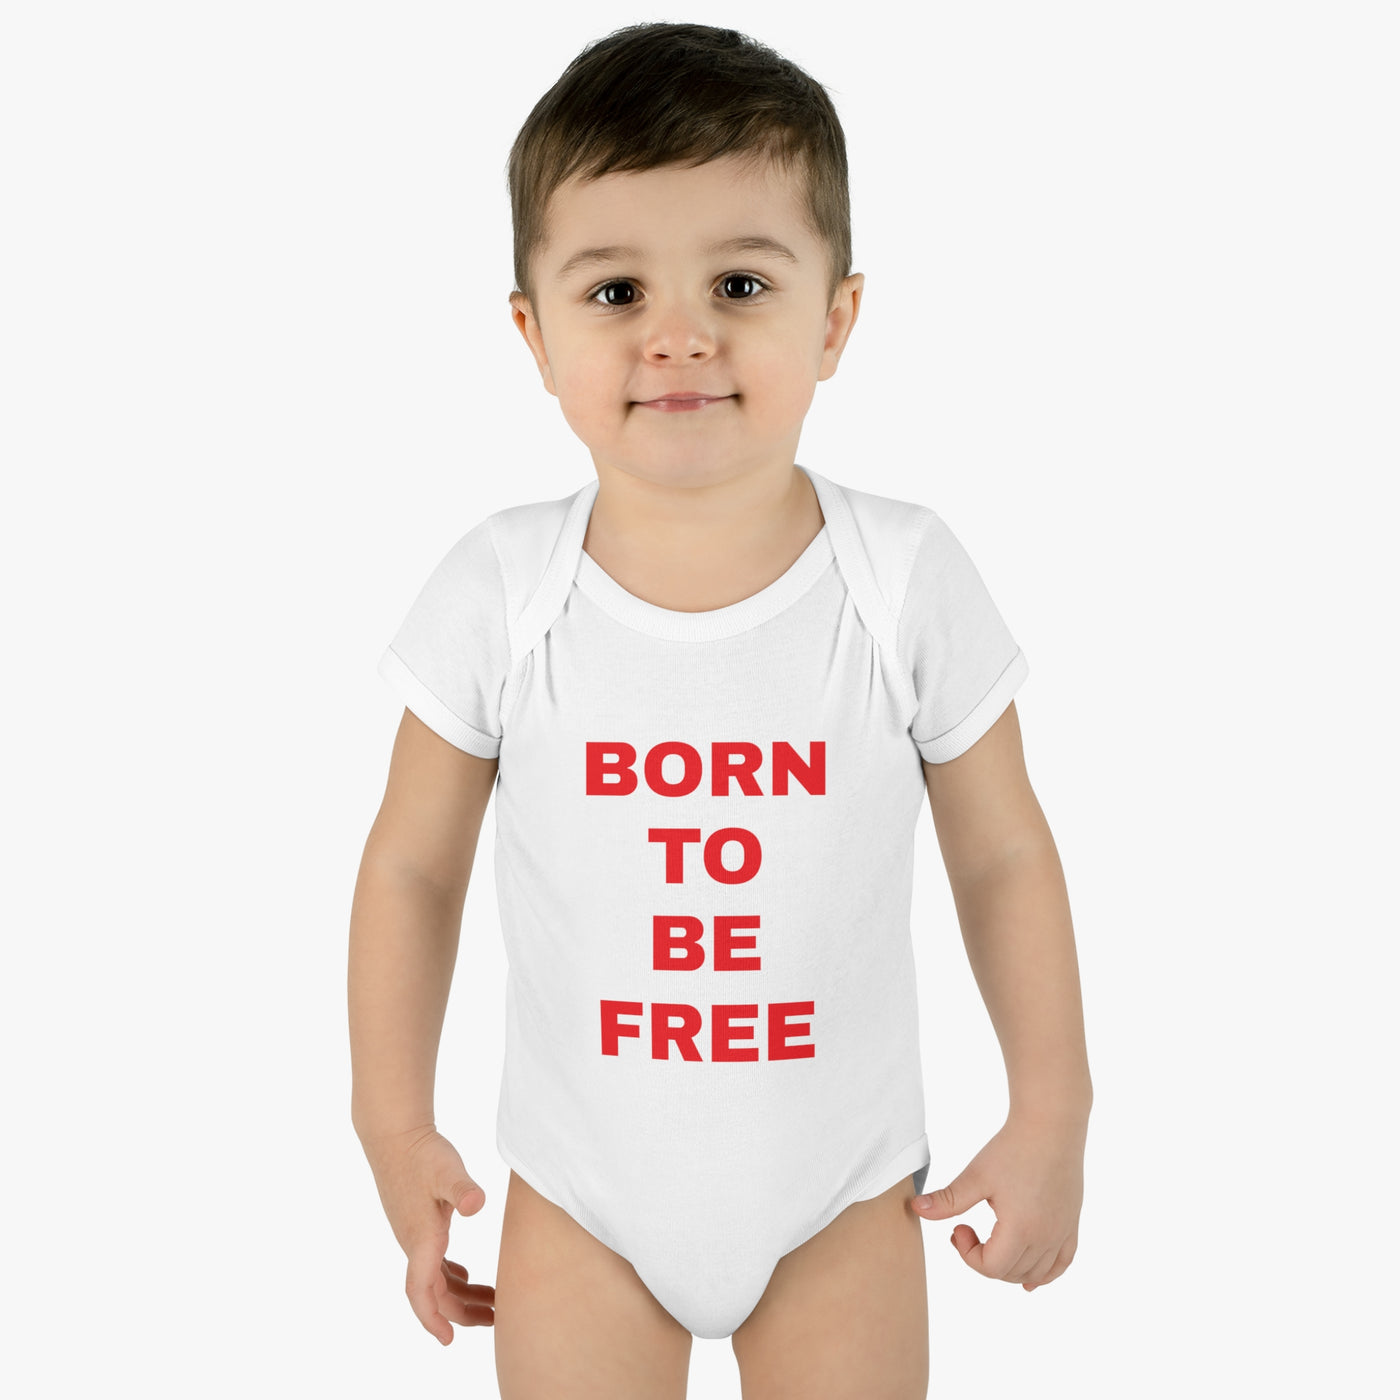 BORN TO BE FREE | PATRIOTIC KIDS SHIRT - Freedom First Supply